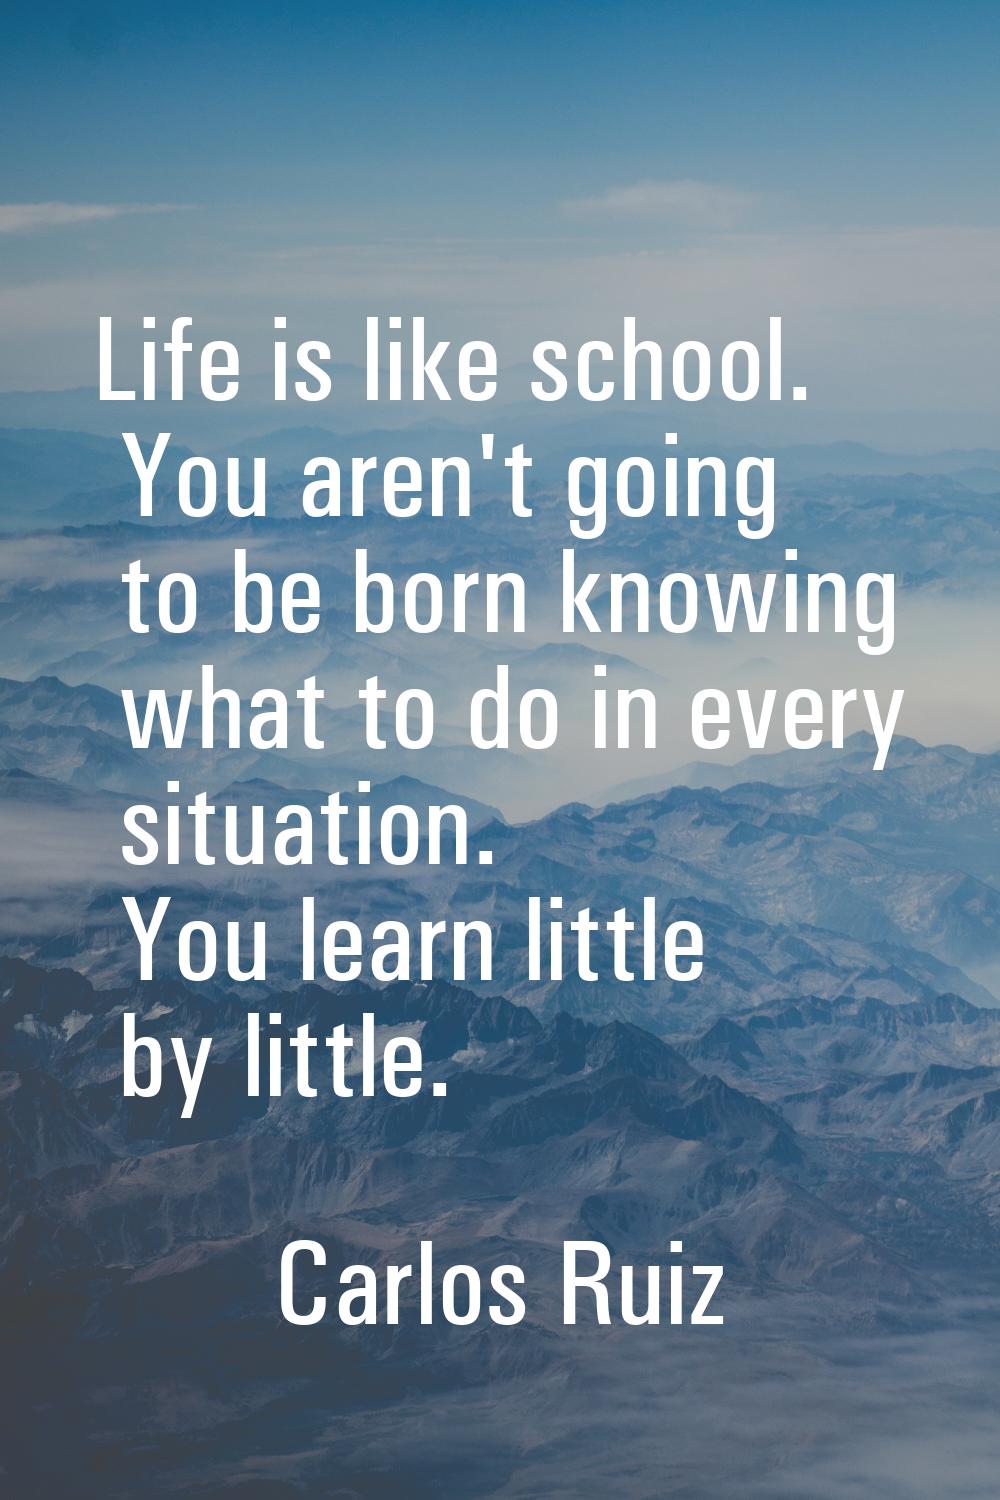 Life is like school. You aren't going to be born knowing what to do in every situation. You learn l